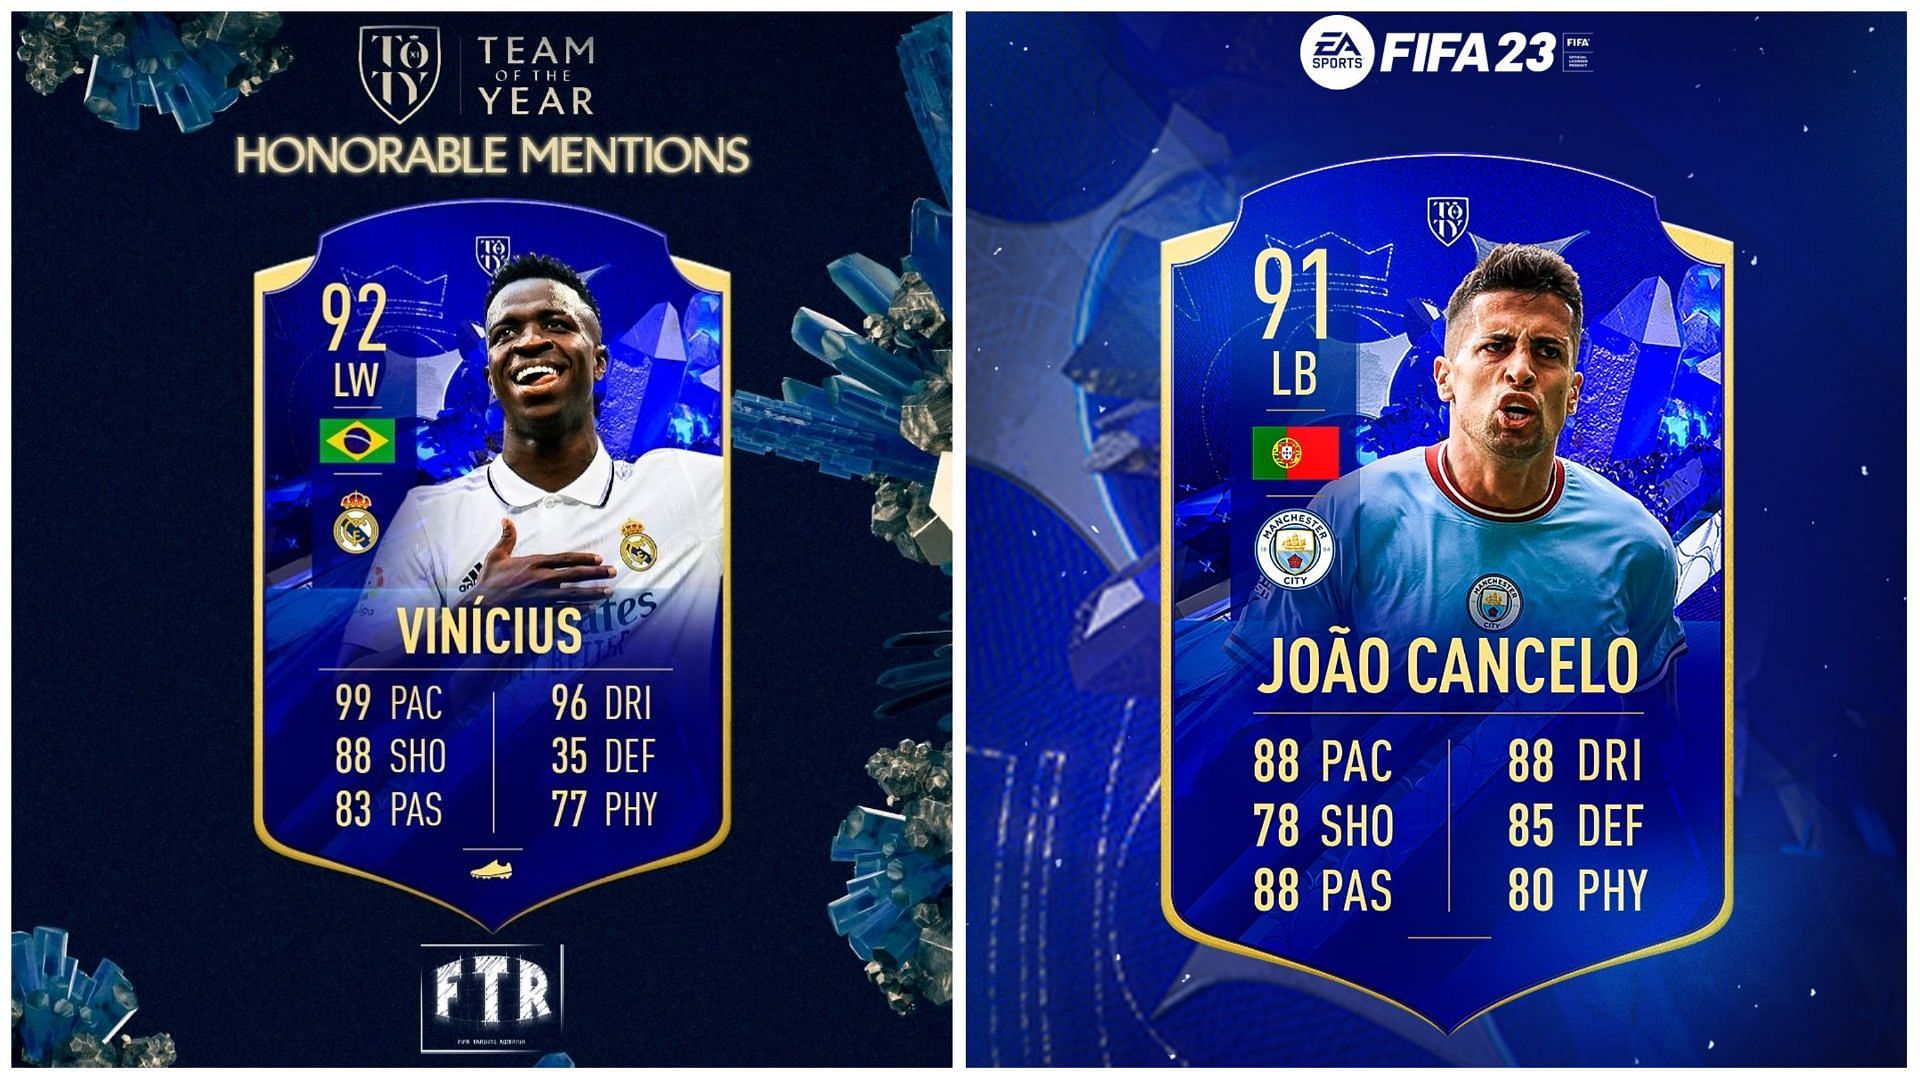 Vinicius and Cancelo will arrive as TOTY Honorable Mentions in FIFA 23 (Images via Twitter/FIFATradingRomania and Twitter/FUT Sheriff)